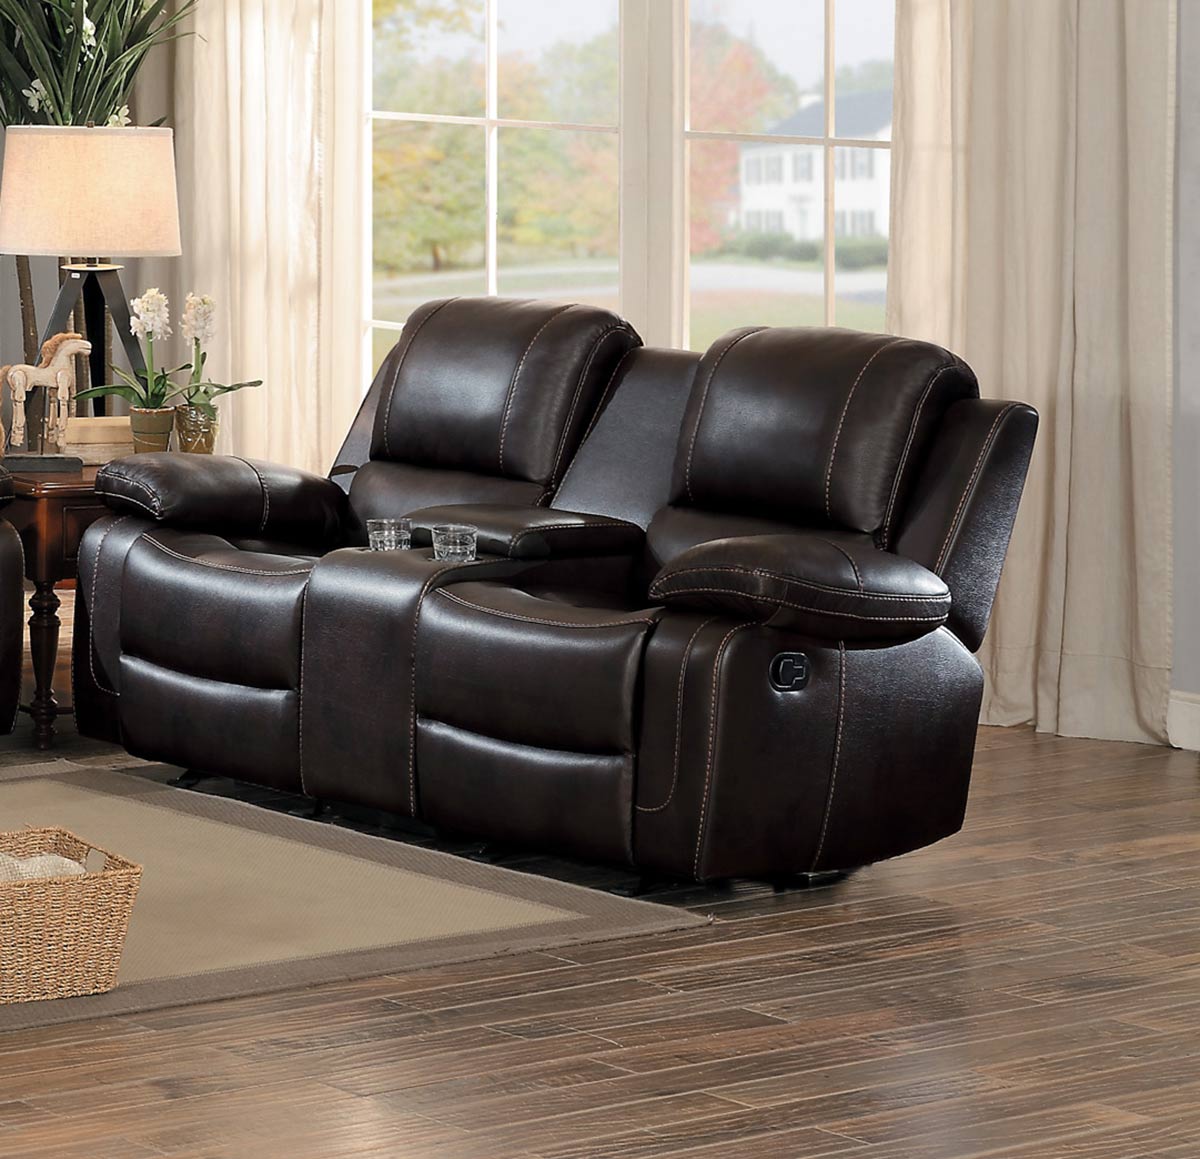 Homelegance Oriole Double Glider Reclining Love Seat with Console - Dark Brown AireHyde Match